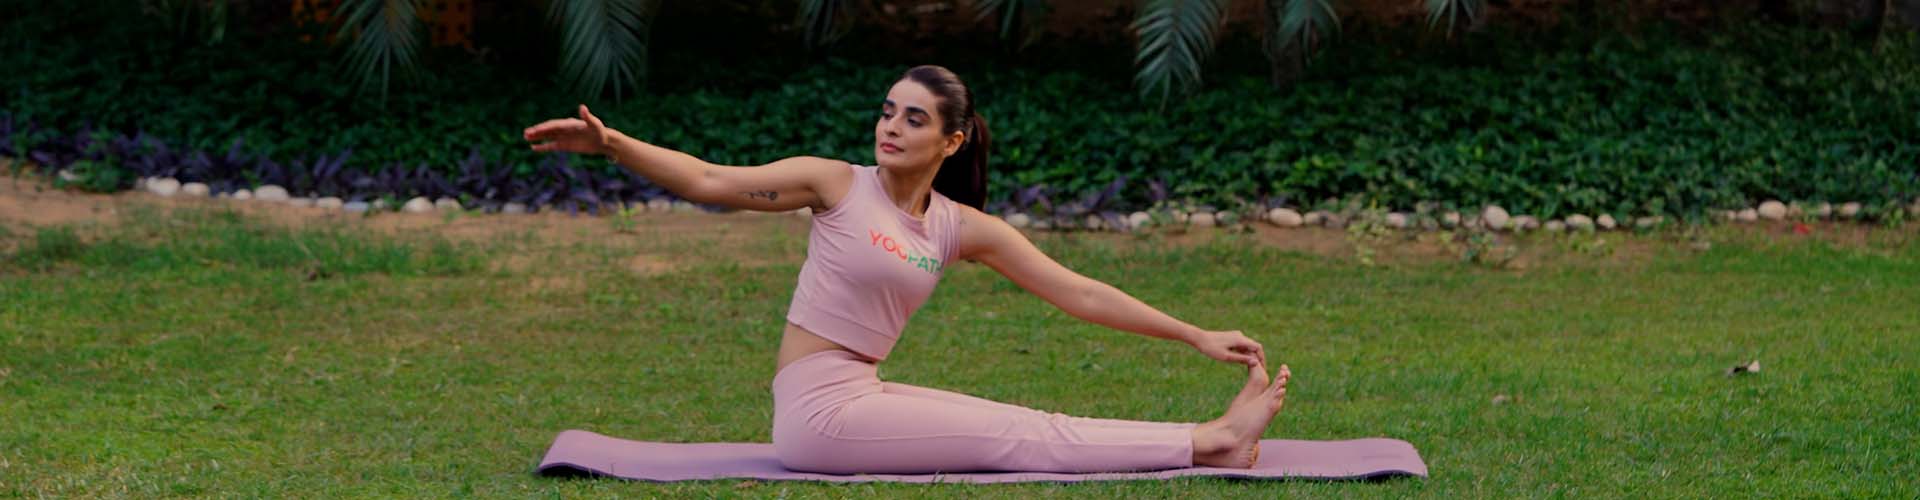 5 Yoga Asanas To Get Rid Of Body Pain And Fatigue